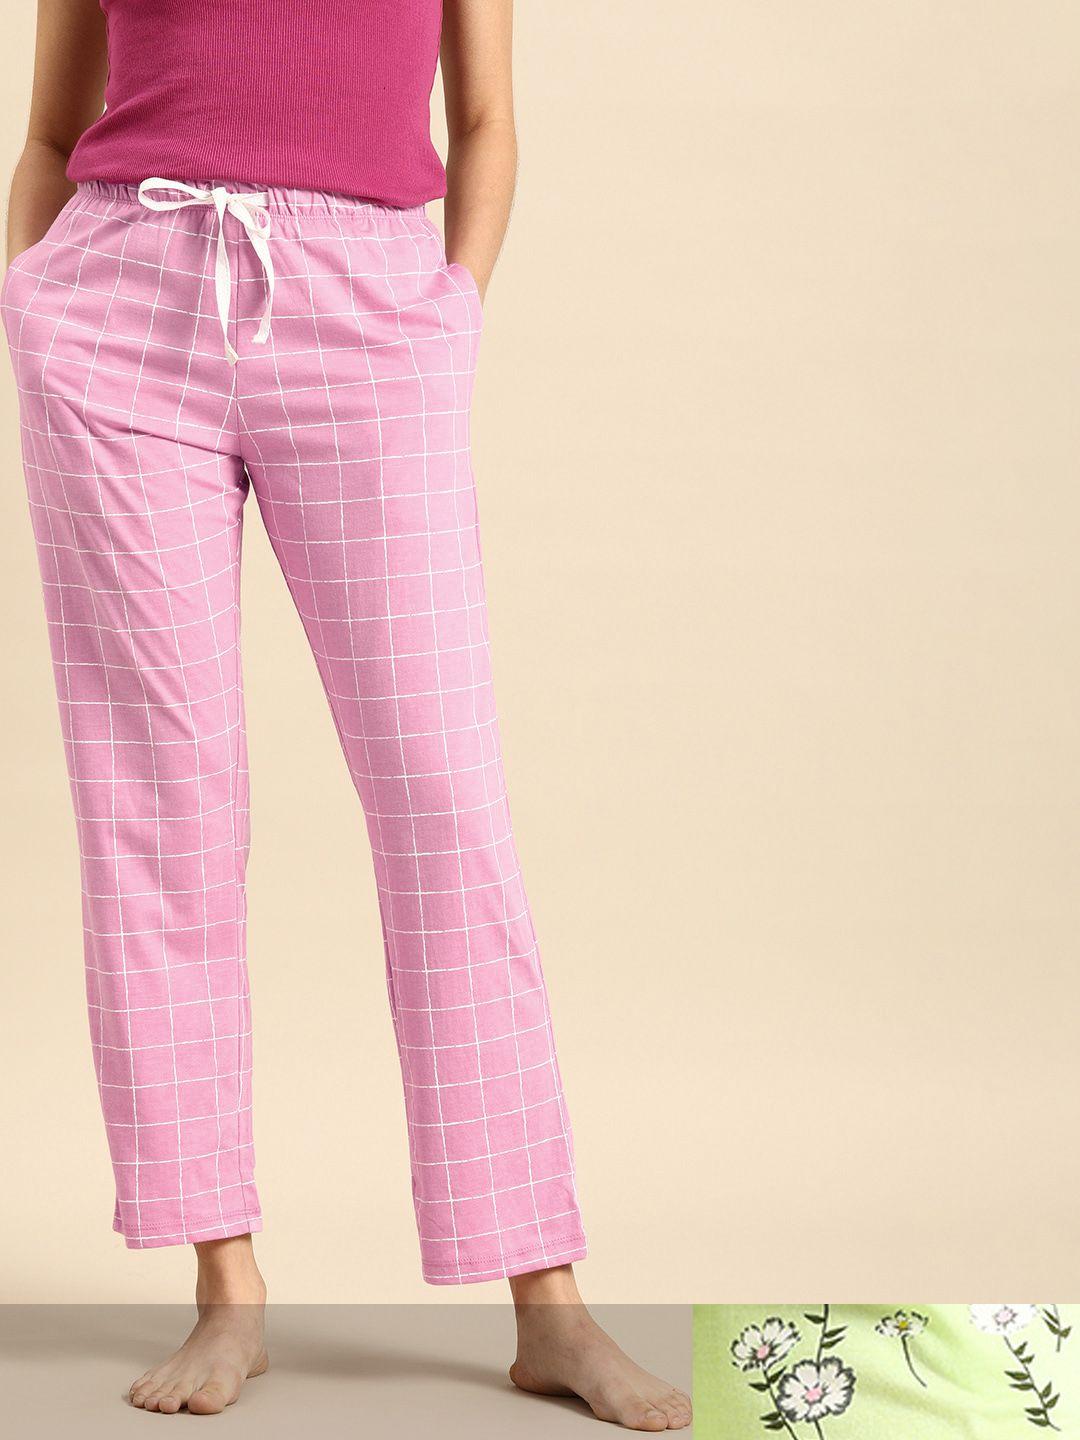 dreamz-by-pantaloons-women-green-&-pink-set-of-2-mid-rise-printed-&-checked-lounge-pants